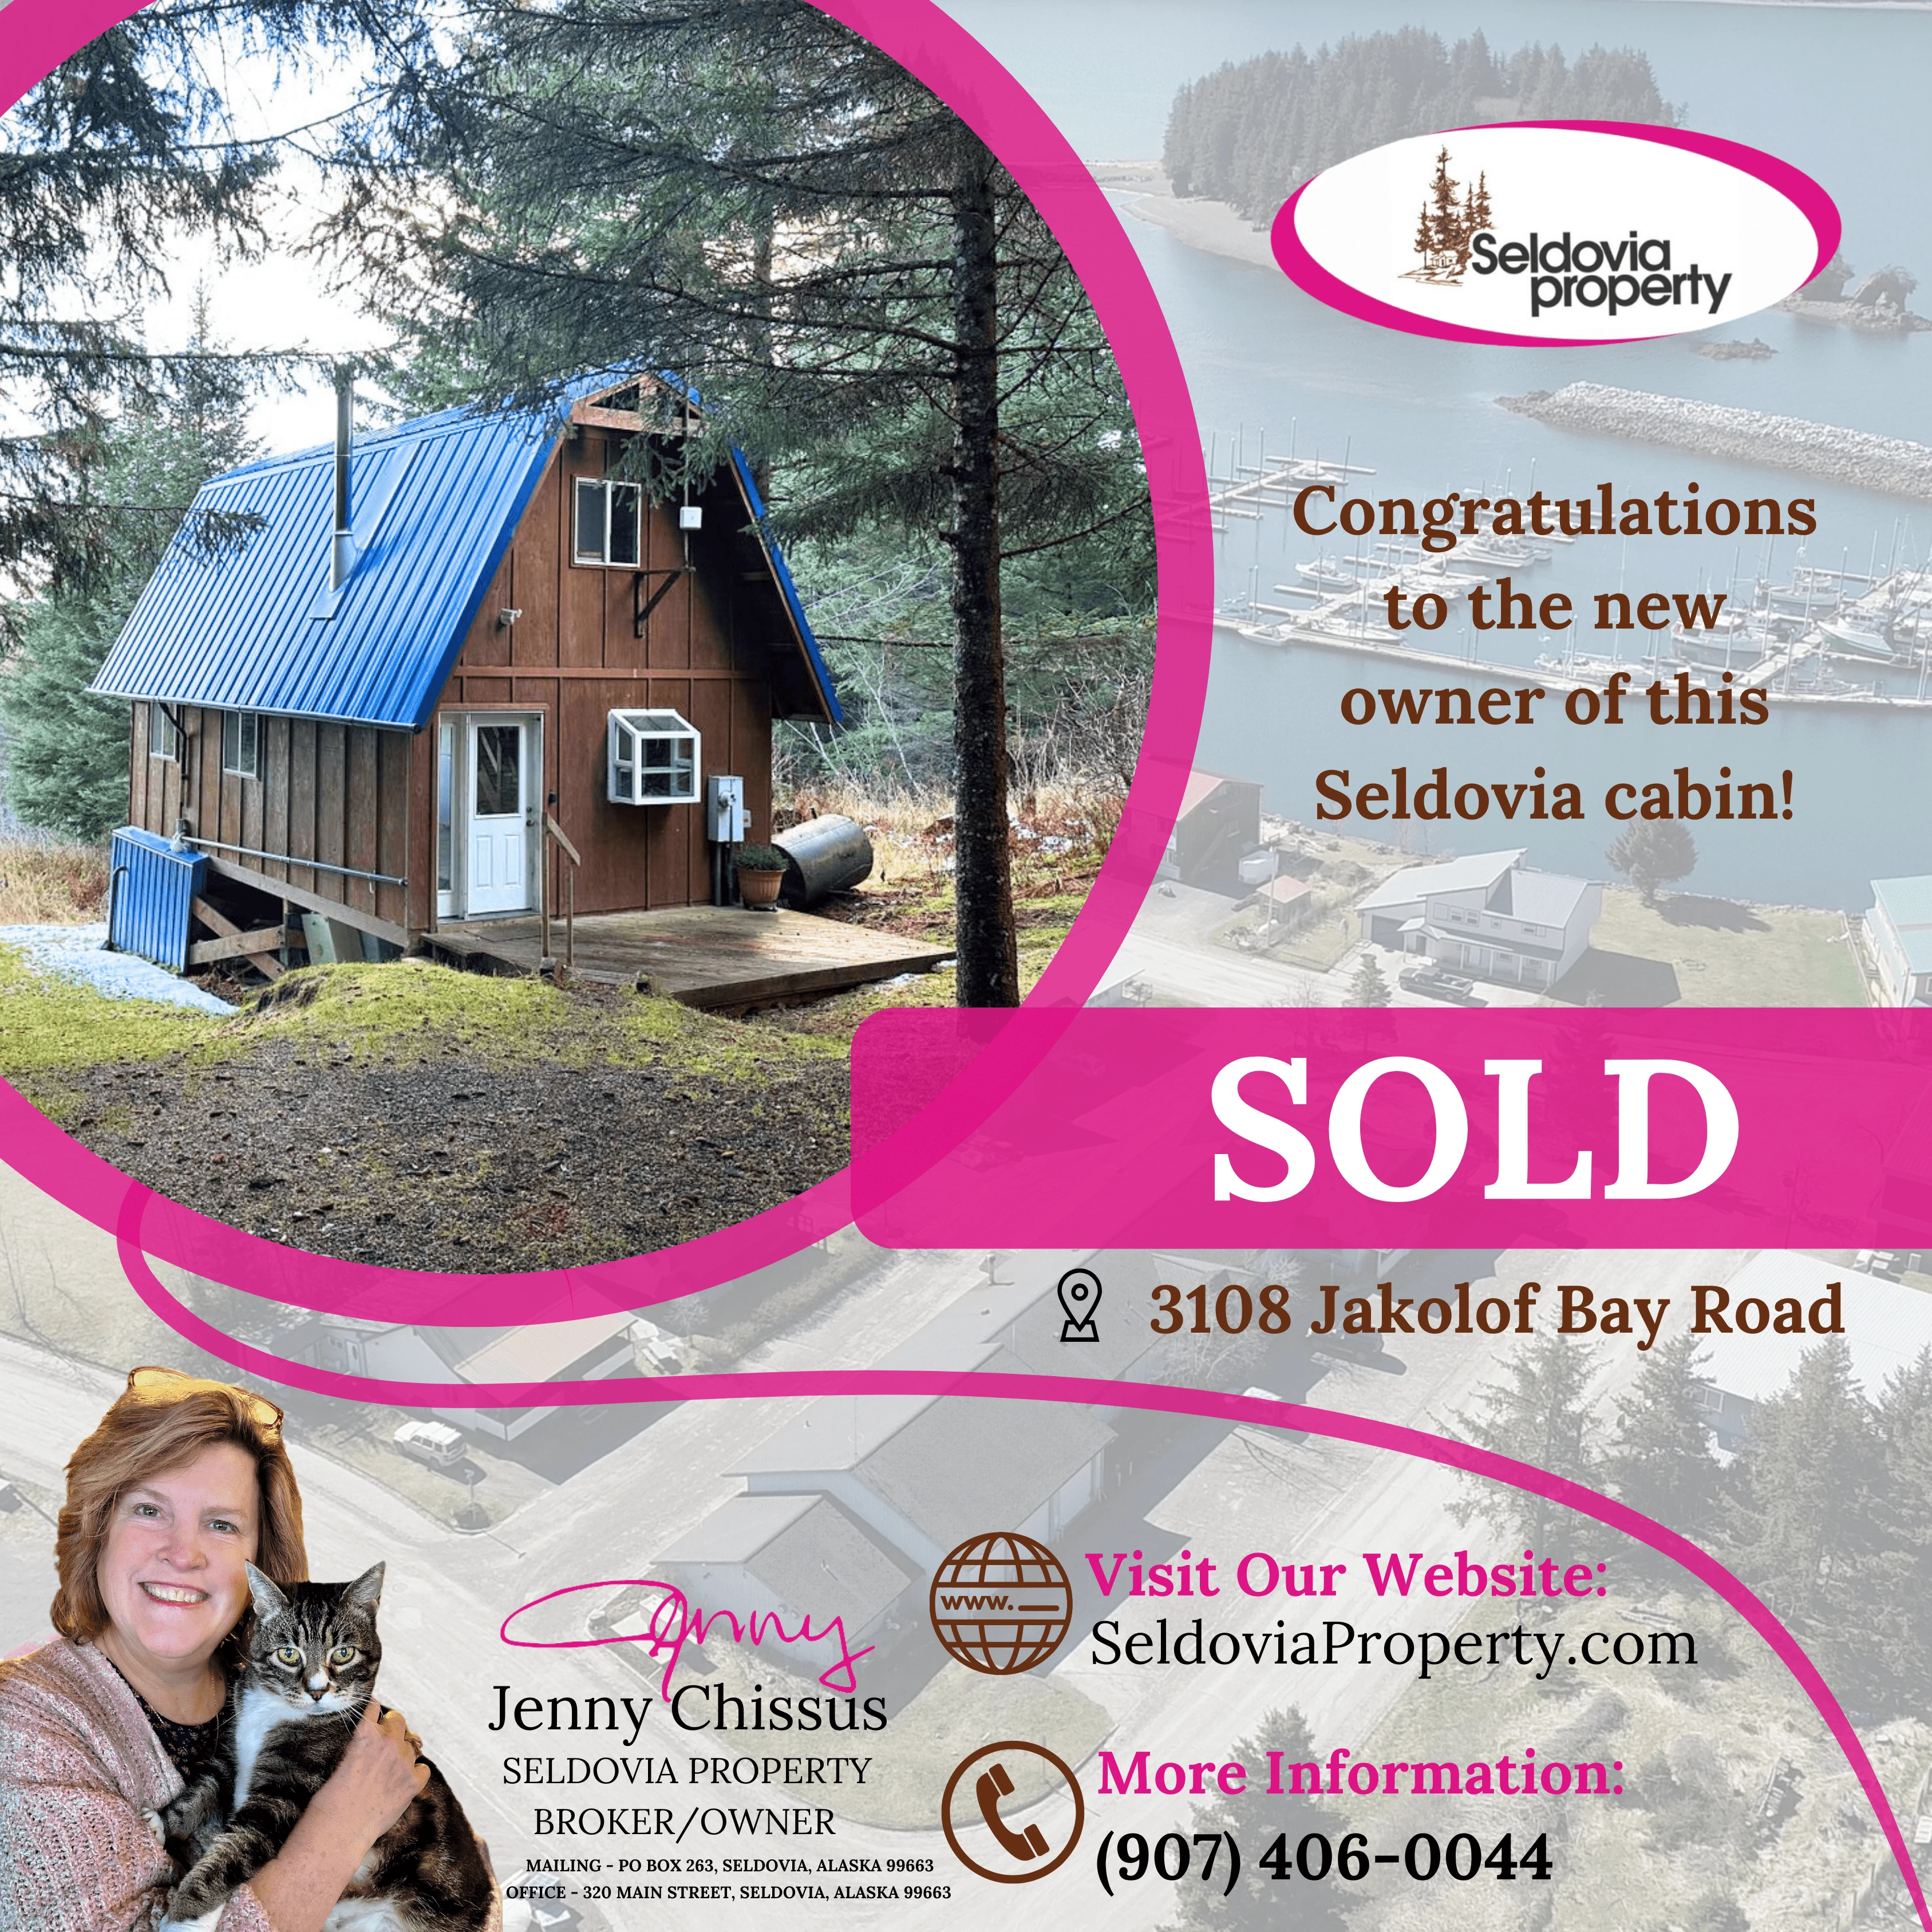 Wahoo! Another Seldovia cabin has found its new owner.